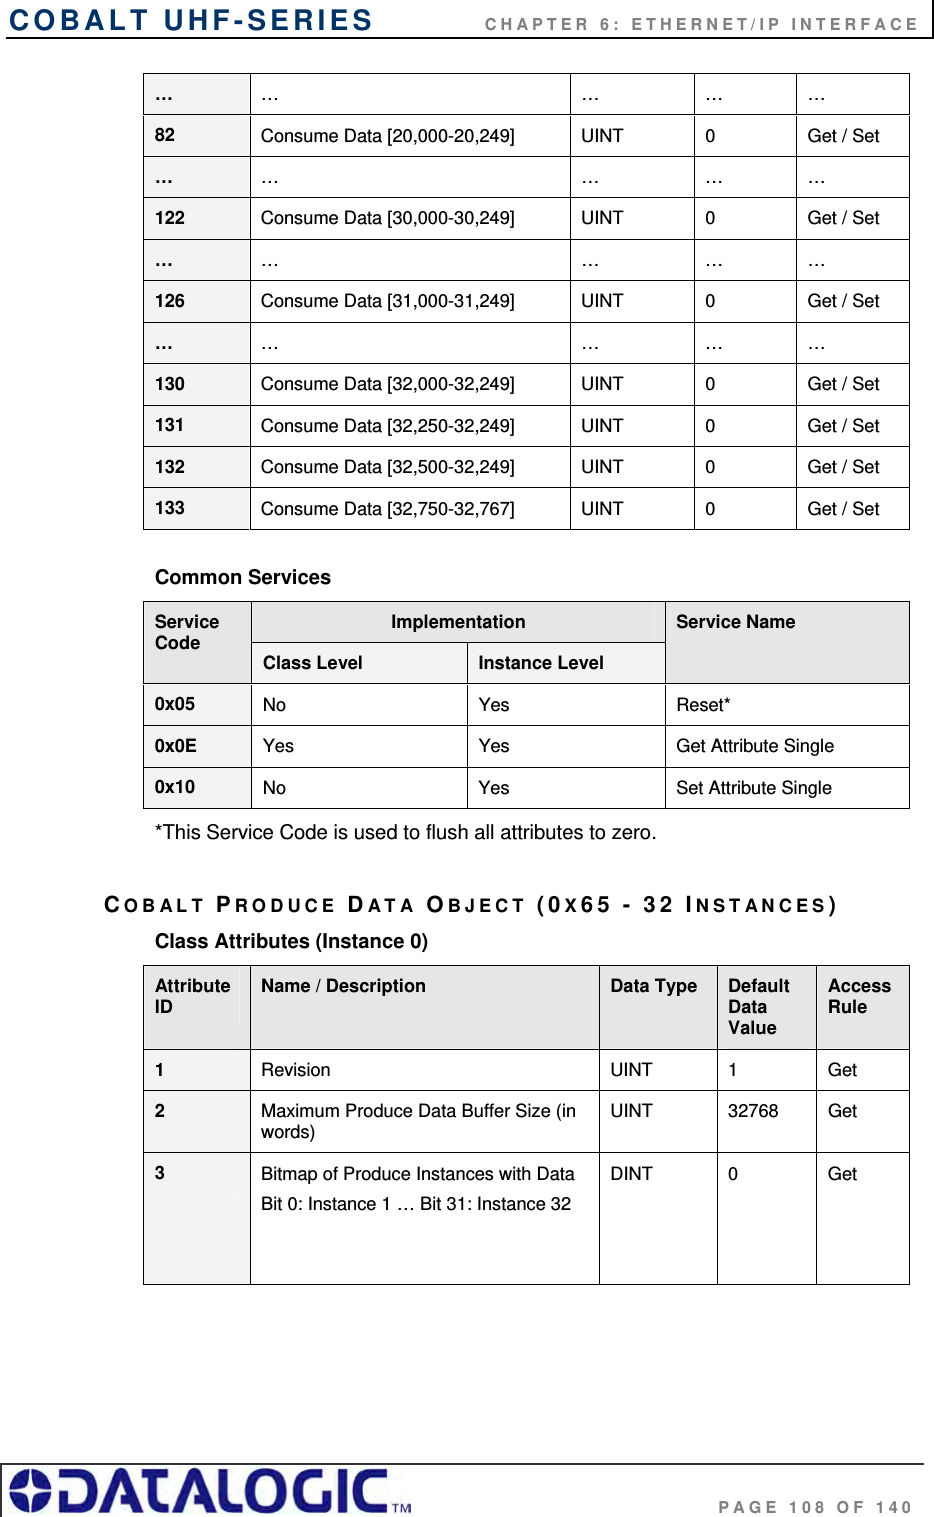 COBALT UHF-SERIES    CHAPTER 6: ETHERNET/IP INTERFACE                                     PAGE 108 OF 140 …  … … … … 82  Consume Data [20,000-20,249]  UINT  0  Get / Set …  … … … … 122  Consume Data [30,000-30,249]  UINT  0  Get / Set …  … … … … 126  Consume Data [31,000-31,249]  UINT  0  Get / Set …  … … … … 130  Consume Data [32,000-32,249]  UINT  0  Get / Set 131  Consume Data [32,250-32,249]  UINT  0  Get / Set 132  Consume Data [32,500-32,249]  UINT  0  Get / Set 133  Consume Data [32,750-32,767]  UINT  0  Get / Set  Common Services Implementation Service Code  Class Level  Instance Level Service Name 0x05  No Yes Reset* 0x0E  Yes  Yes  Get Attribute Single 0x10  No  Yes  Set Attribute Single *This Service Code is used to flush all attributes to zero.  COBALT PRODUCE DATA OBJECT (0X65 - 32 INSTANCES) Class Attributes (Instance 0) Attribute ID  Name / Description  Data Type  Default Data Value Access Rule 1  Revision UINT 1 Get 2  Maximum Produce Data Buffer Size (in words) UINT 32768 Get 3  Bitmap of Produce Instances with Data Bit 0: Instance 1 … Bit 31: Instance 32 DINT 0  Get     